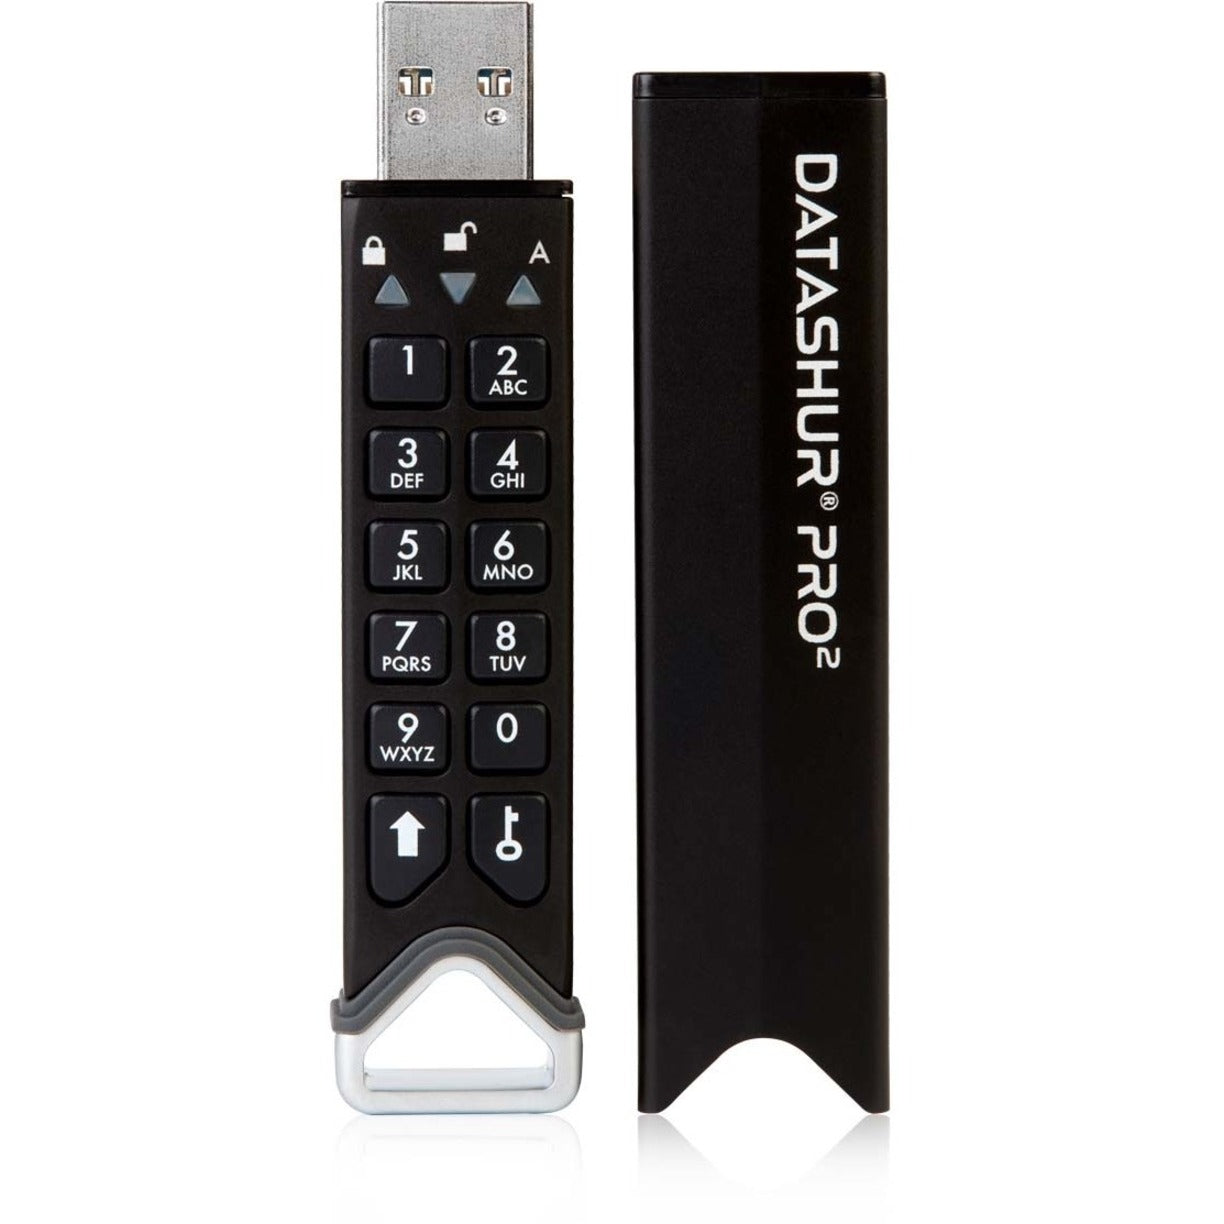 iStorage IS-FL-DP2-256-256 datAshur PRO² 256GB USB 3.2 (Gen 1) Type A Flash Drive, Secure, FIPS 140-2 Level 3 Certified, Password Protected, Dust/Water-Resistant